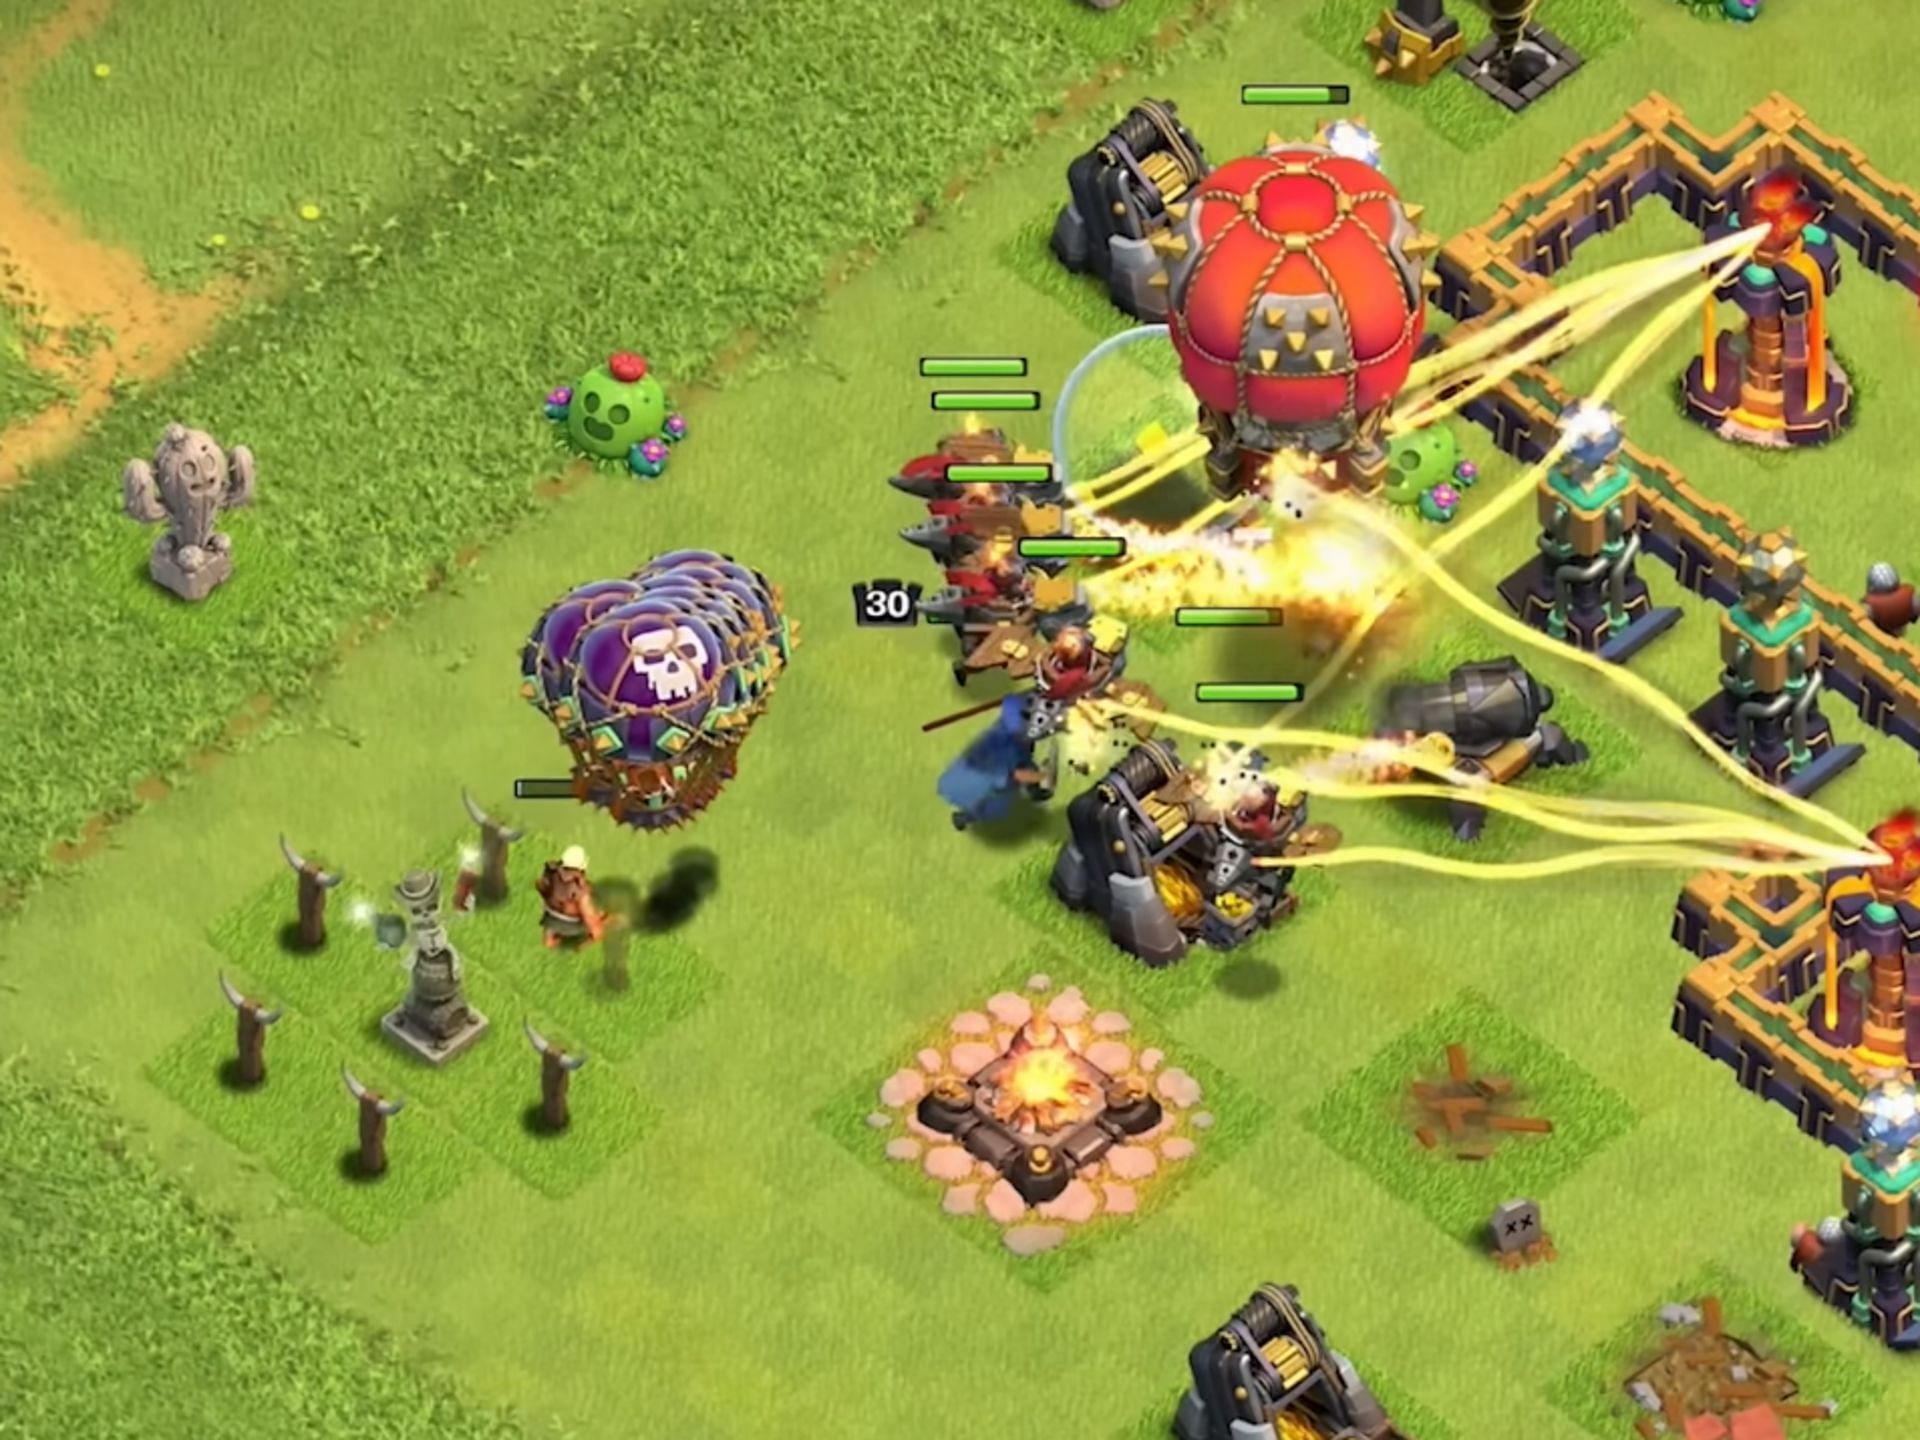 Main attacking force (Image via Supercell)